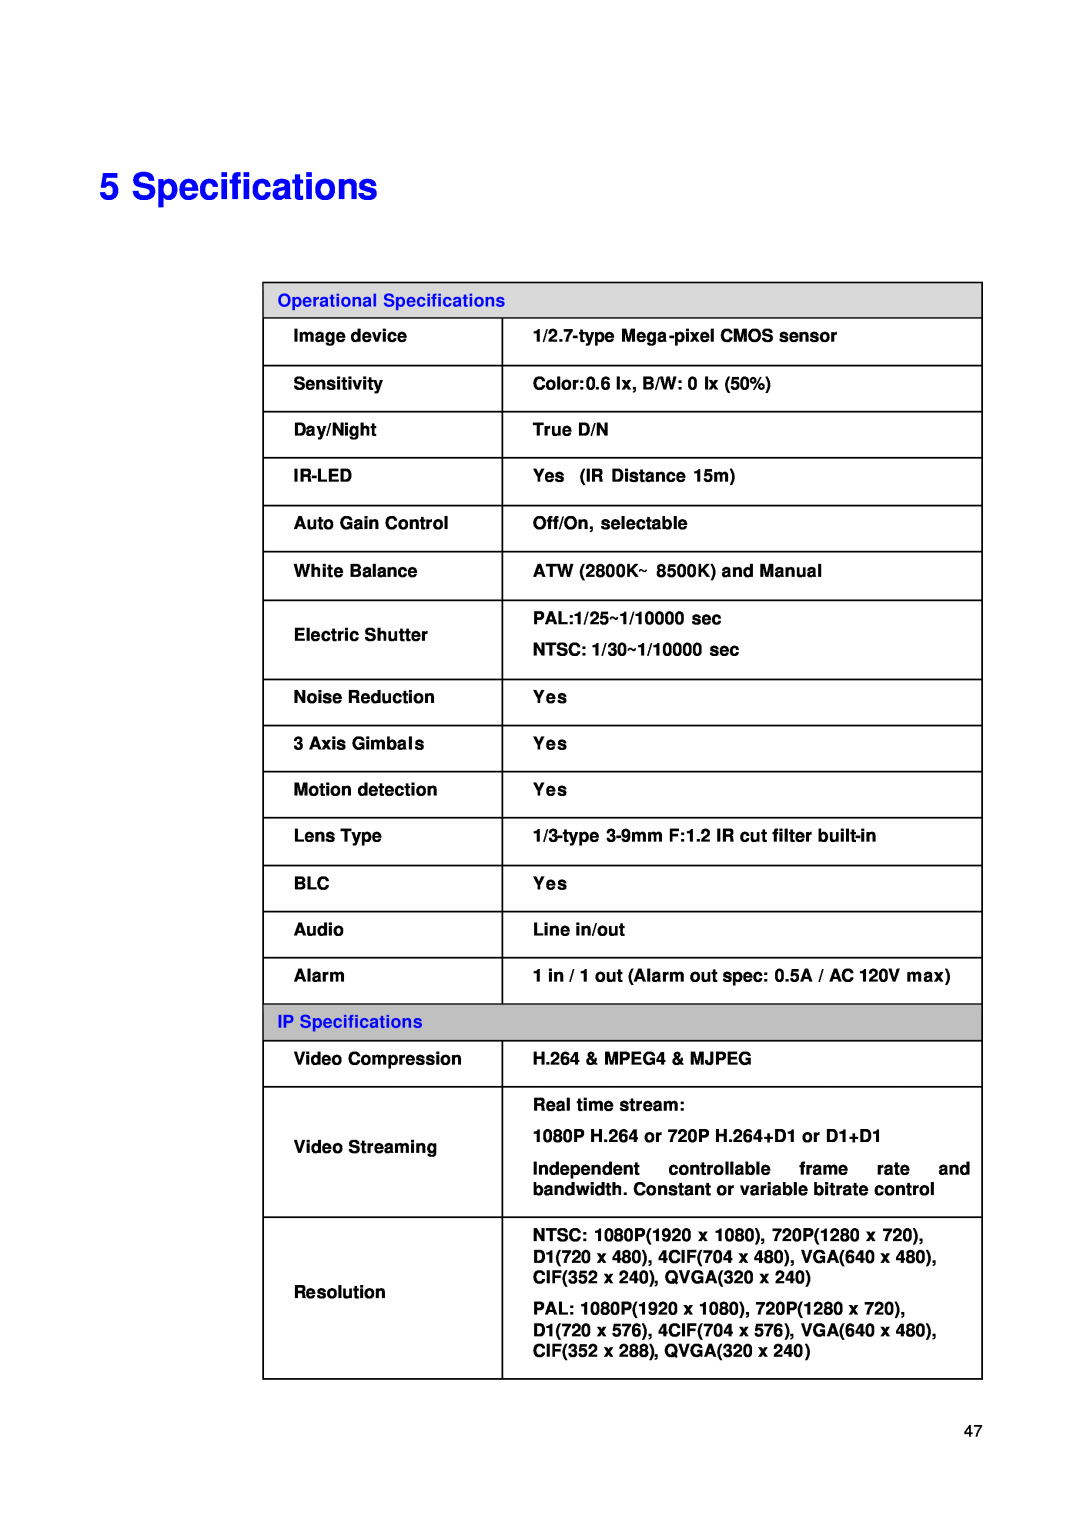 JVC VN-T216VPRU manual Operational Specifications, IP Specifications 